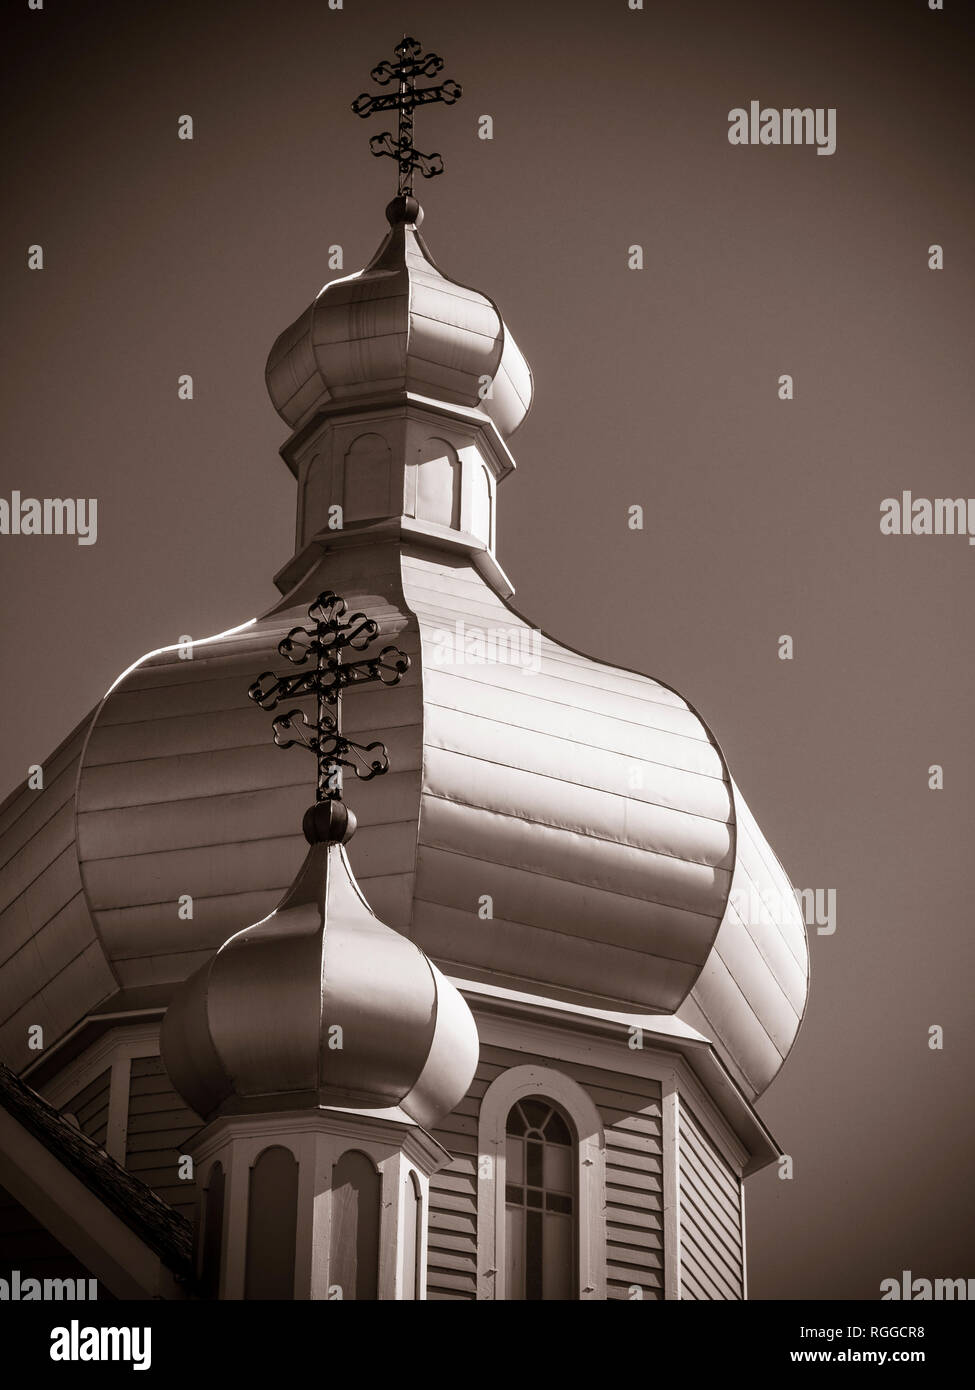 Onion Domes of the Church at the Ukrainian Folk Museum: Two domes topped by eastern crosses decorate the roof of the heritage church. Stock Photo